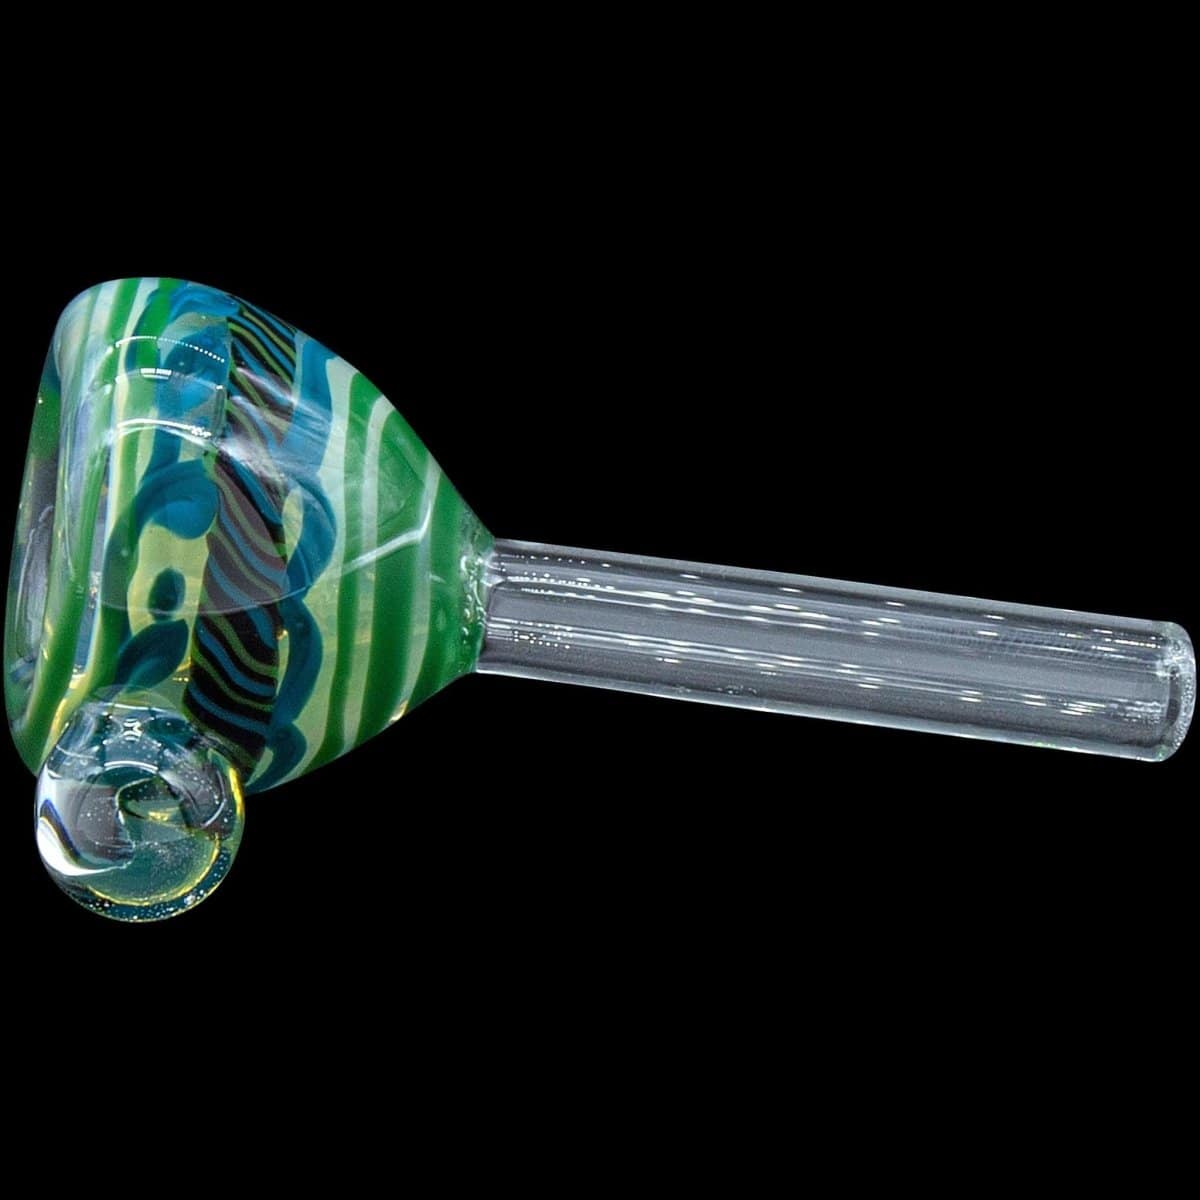 LA Pipes Smoking Accessory Green Hues Painted Warrior Pull-Stem Slide Bowl